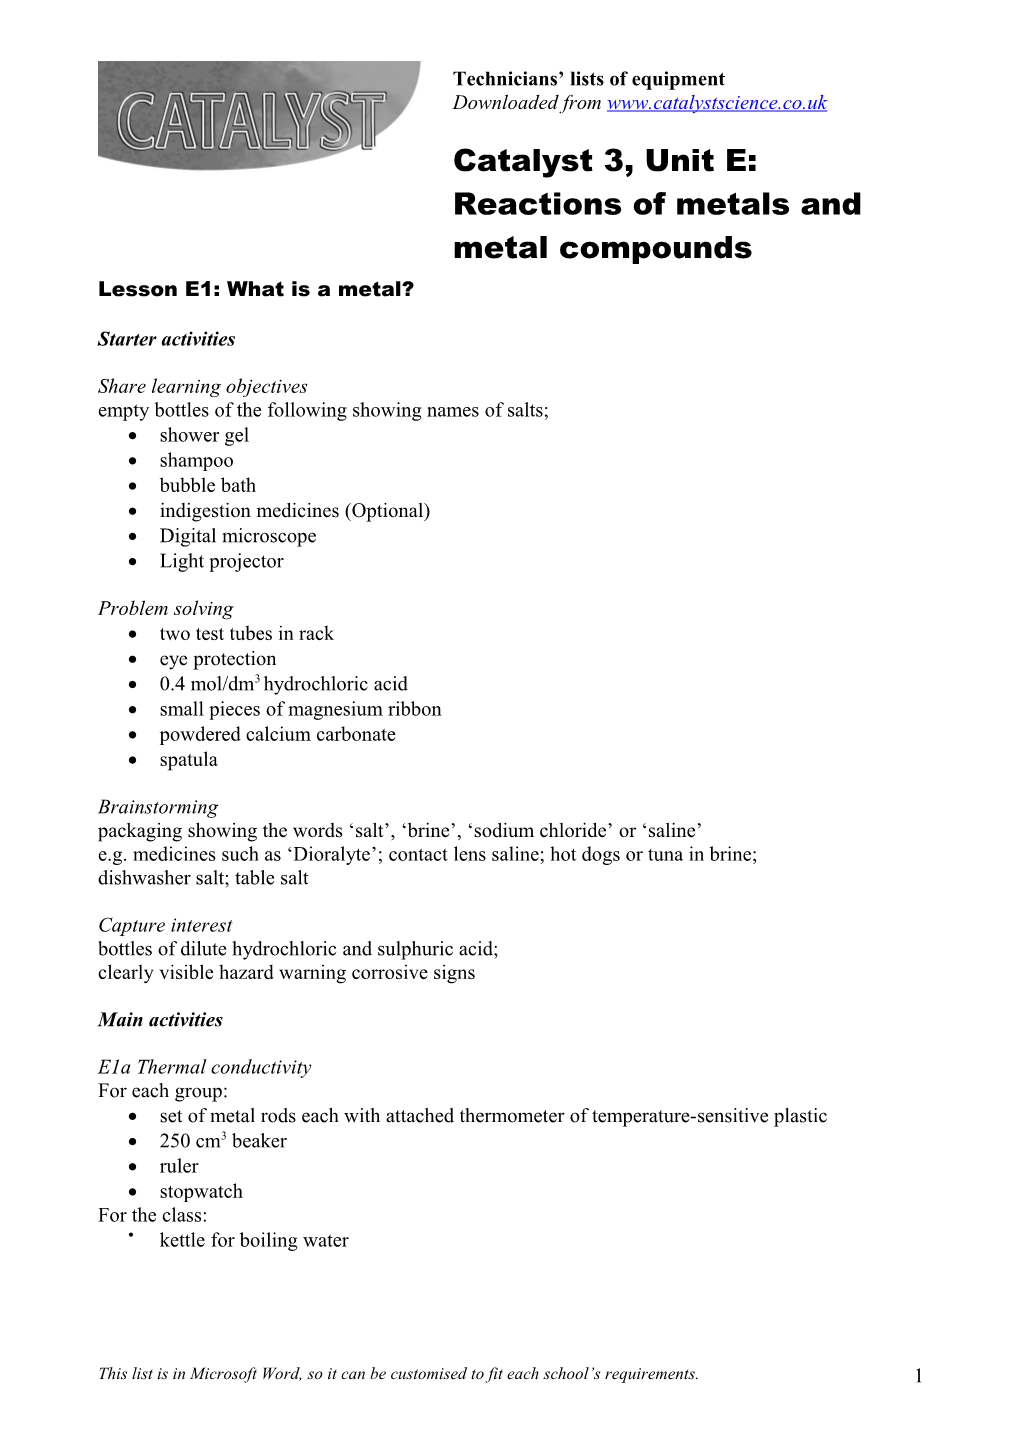 Unit E: Reactions of Metals and Metal Compounds